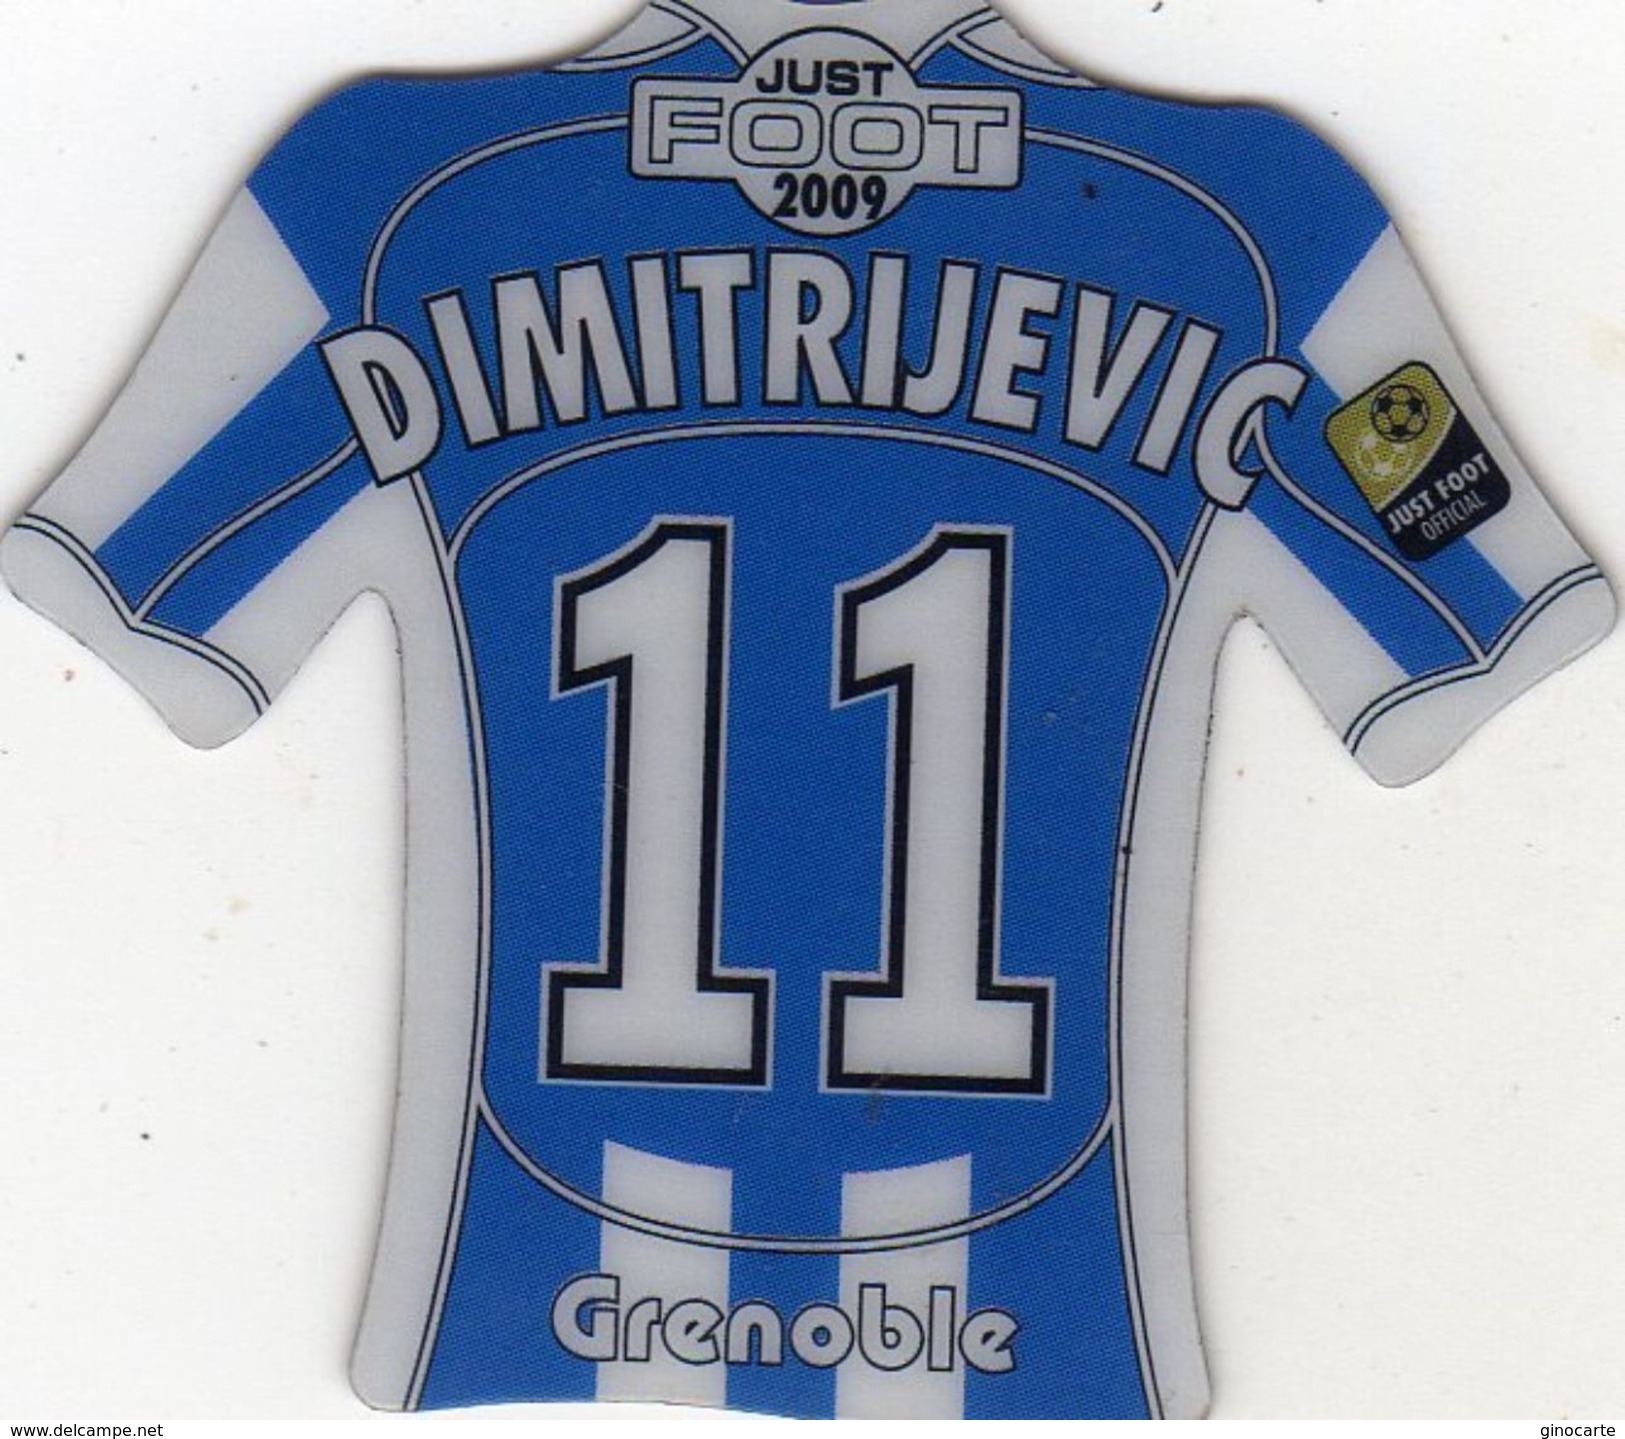 Magnet Magnets Maillot De Football Pitch Grenoble Dimitrijevic 2009 - Sport